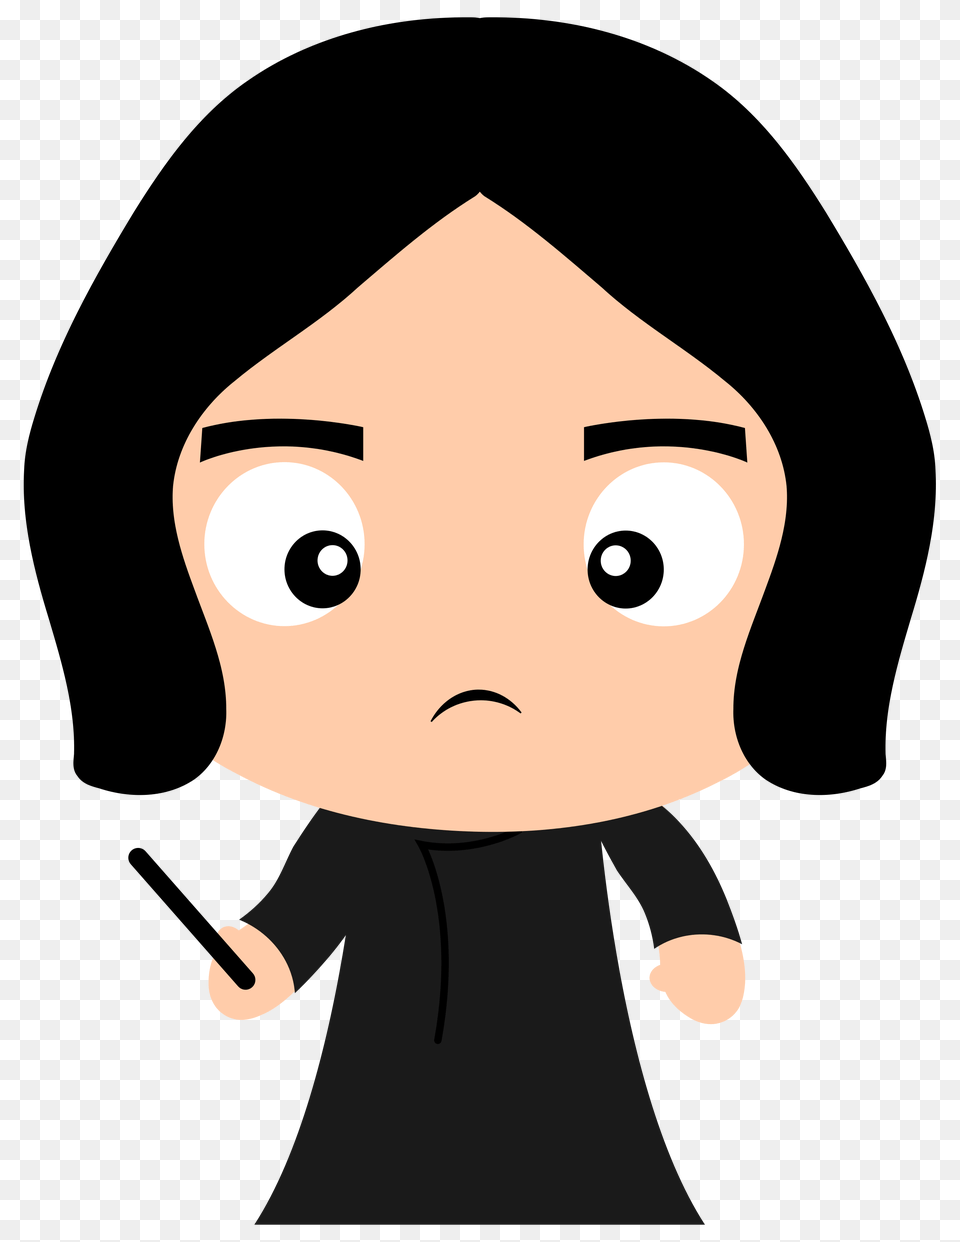 Severus Snape From Harry Potter Head Of Slytherin House, Face, Person, Photography, Portrait Png Image